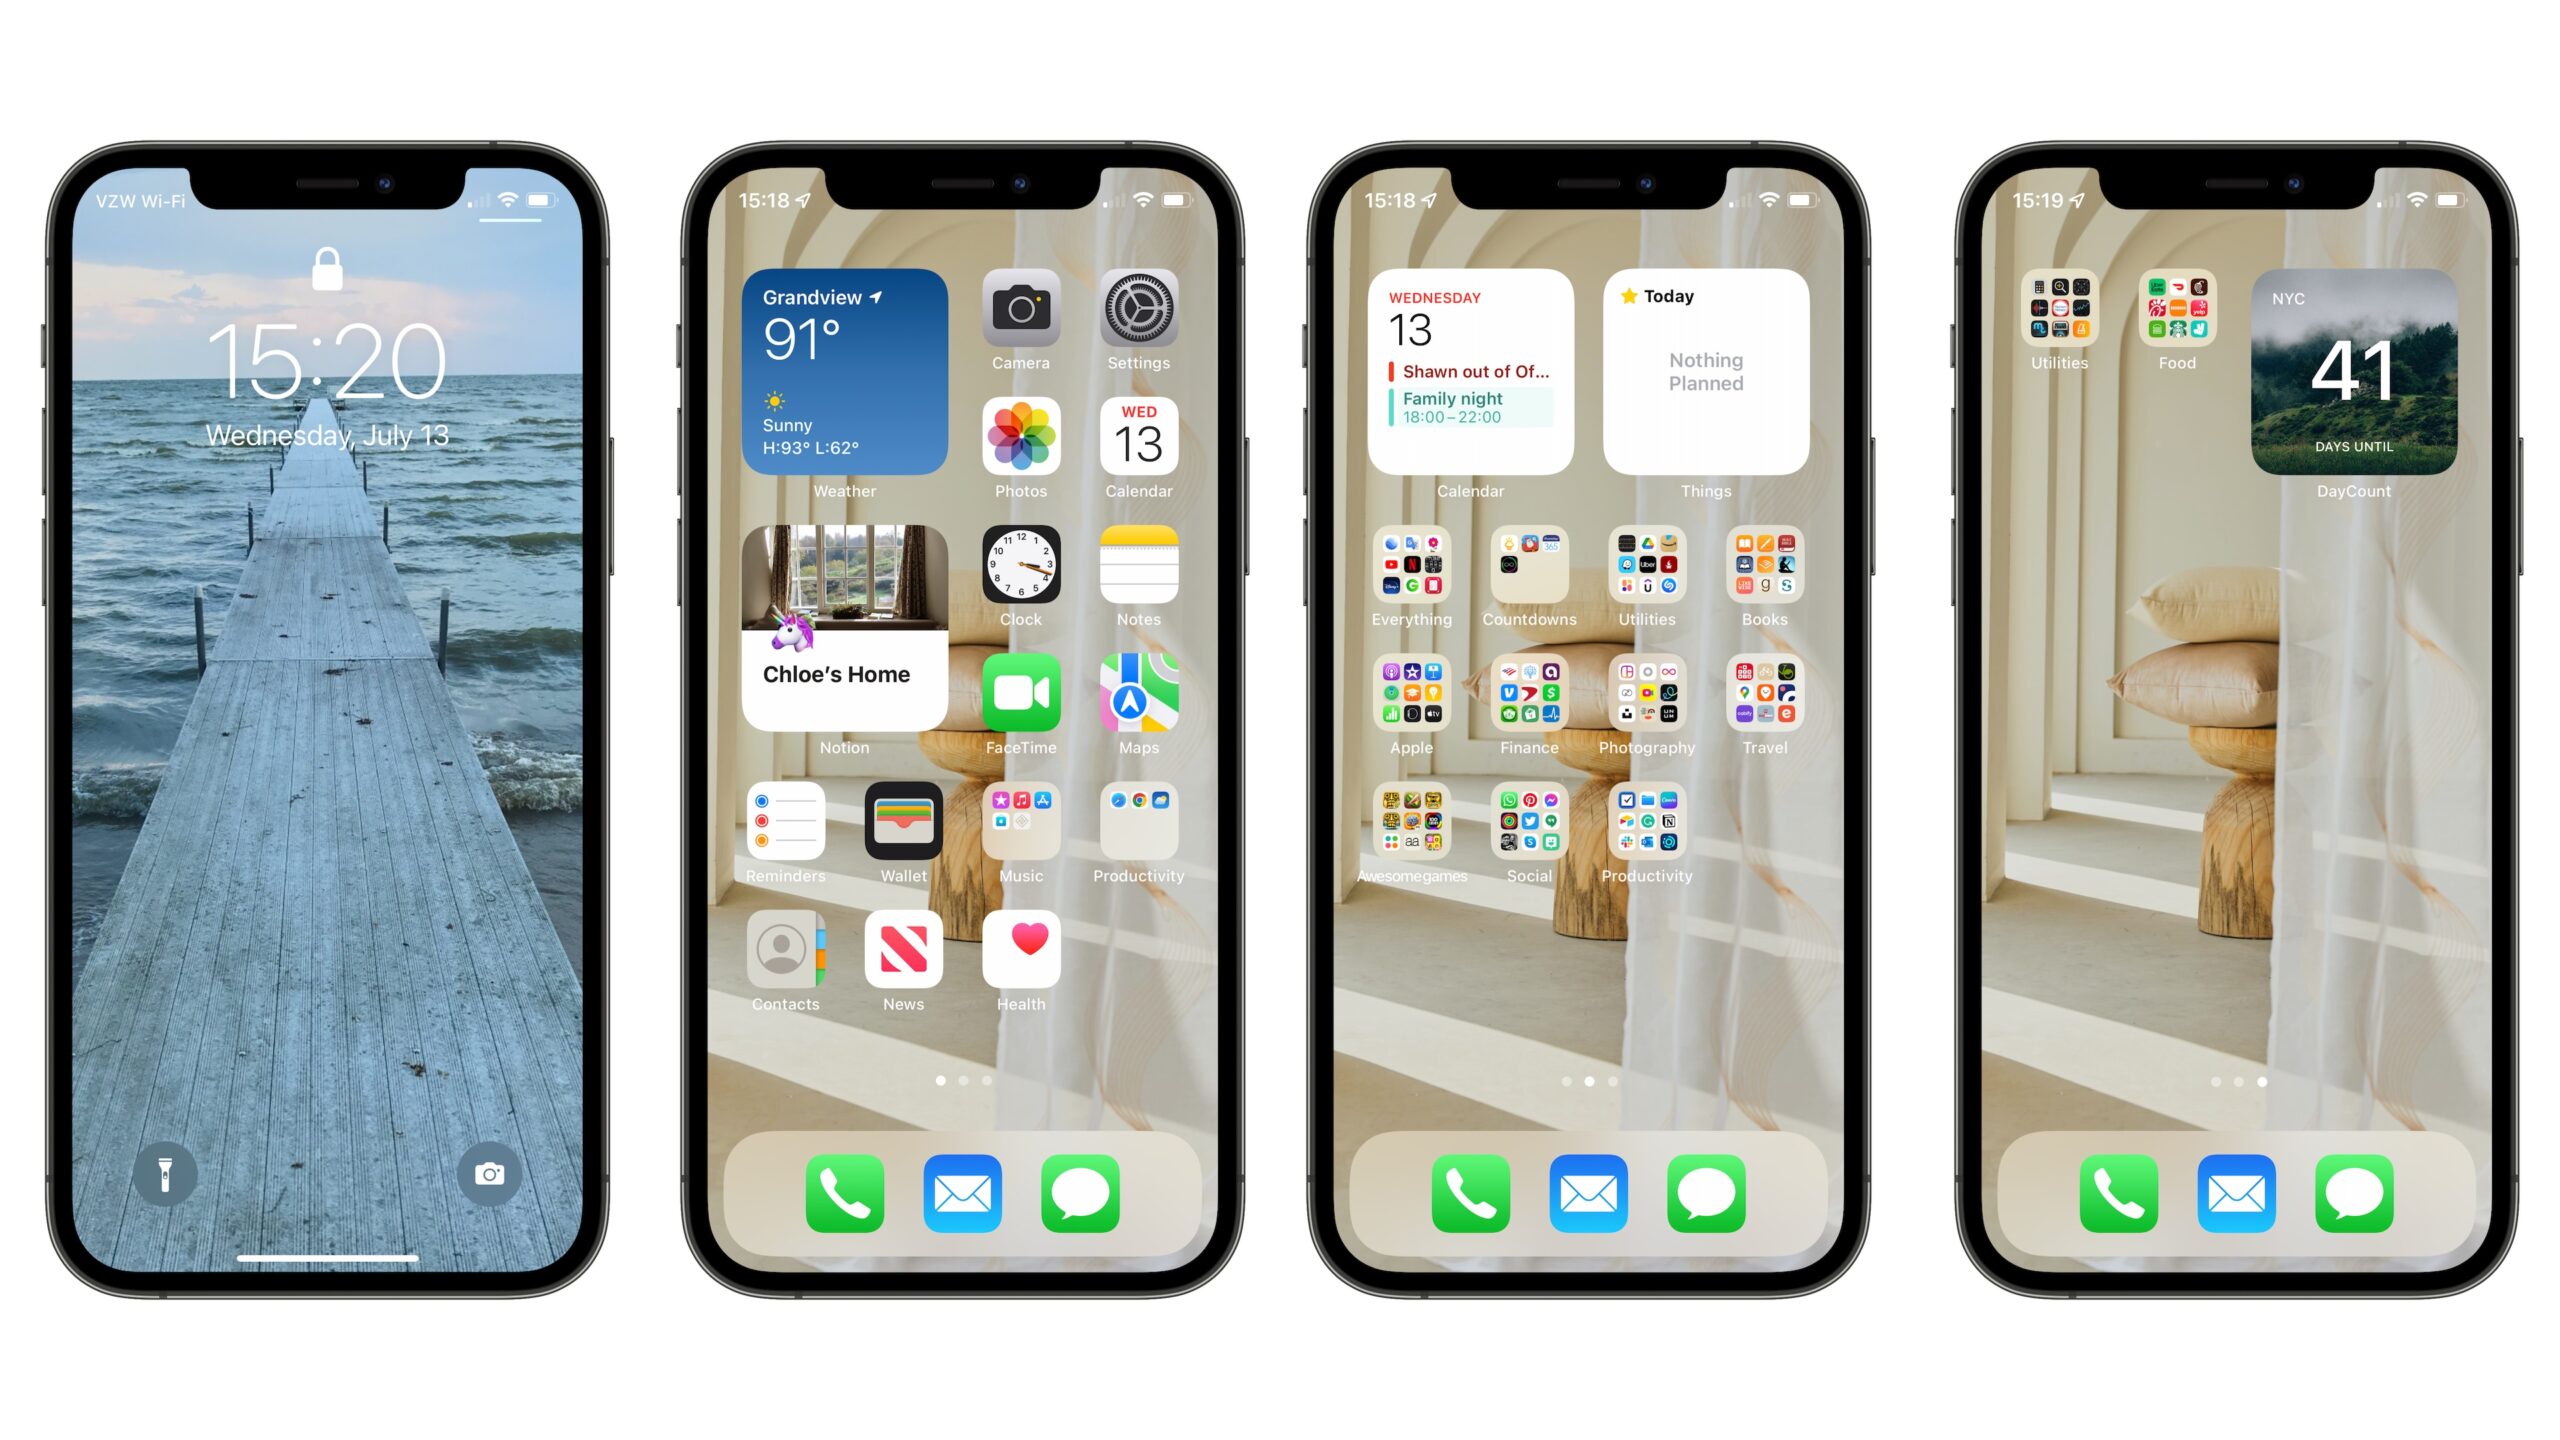 See How Chloe Revamped Her iPhone Home Screen with Widgets